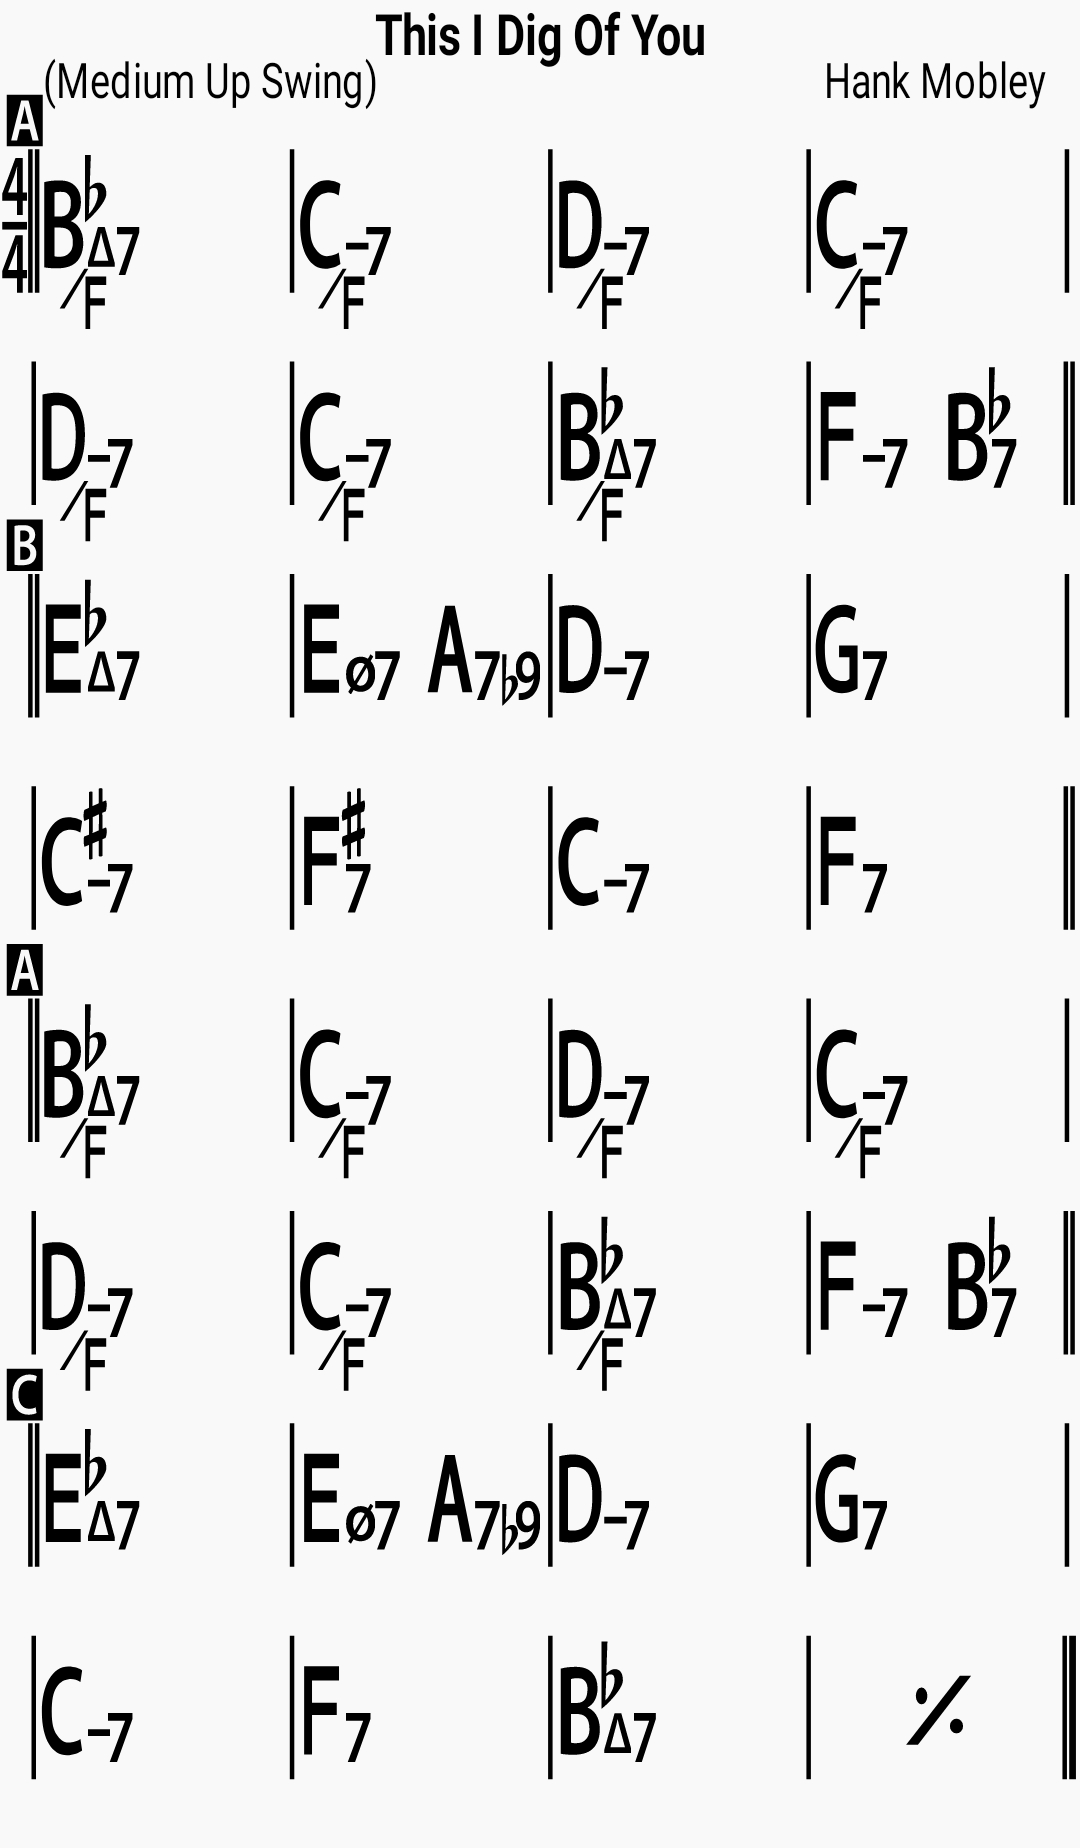 Chord chart for the jazz standard This I Dig Of You